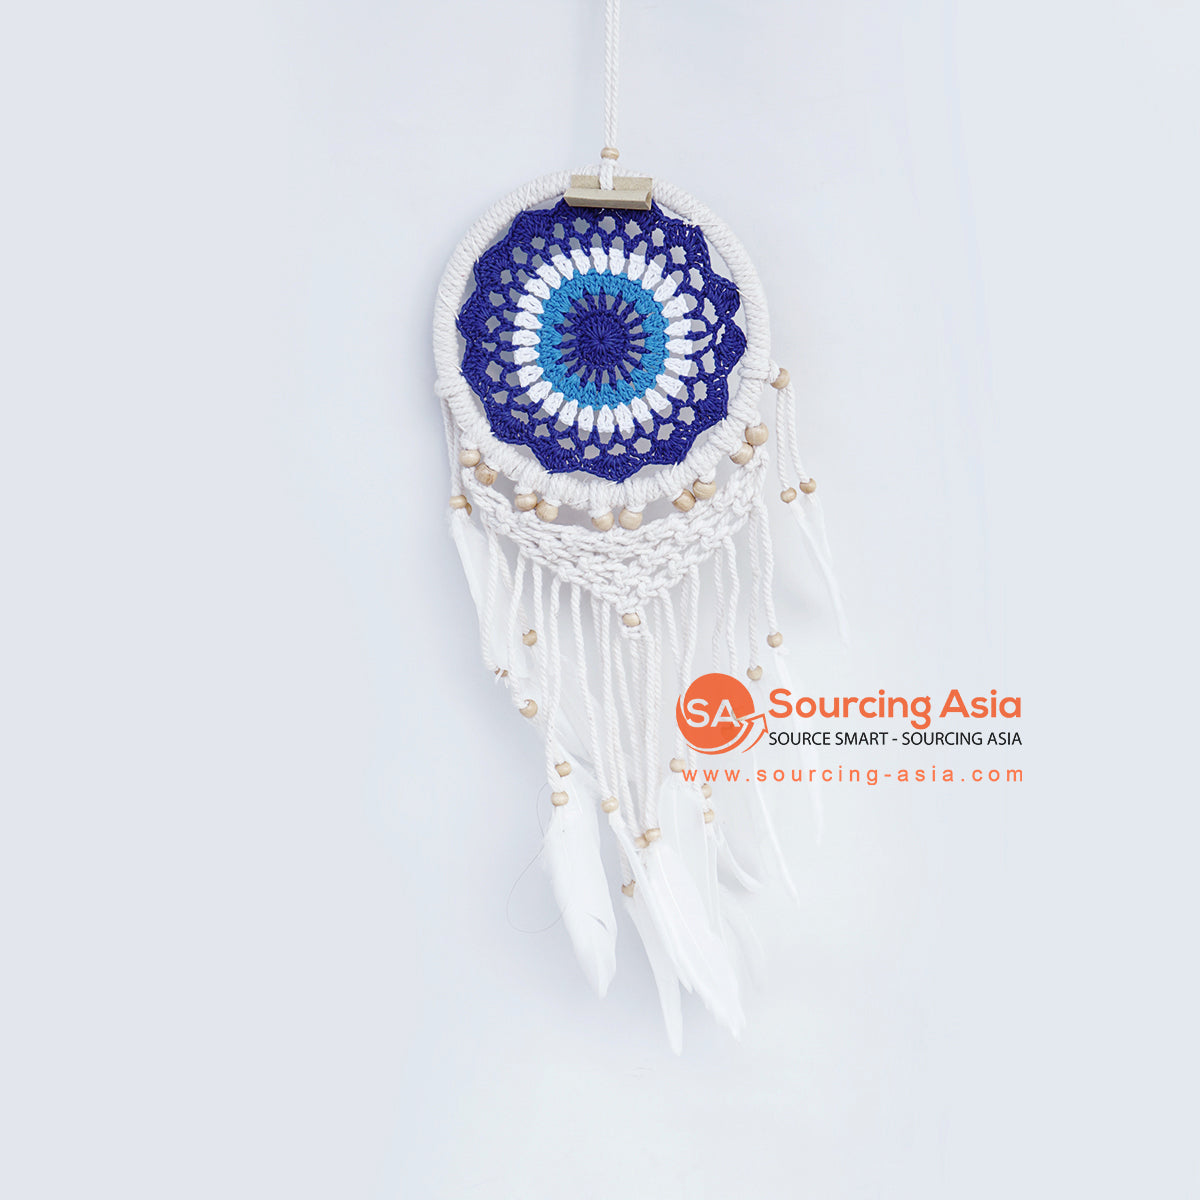 LINDC013 BLUE AND WHITE FEATHERED MACRAME DREAM CATCHER